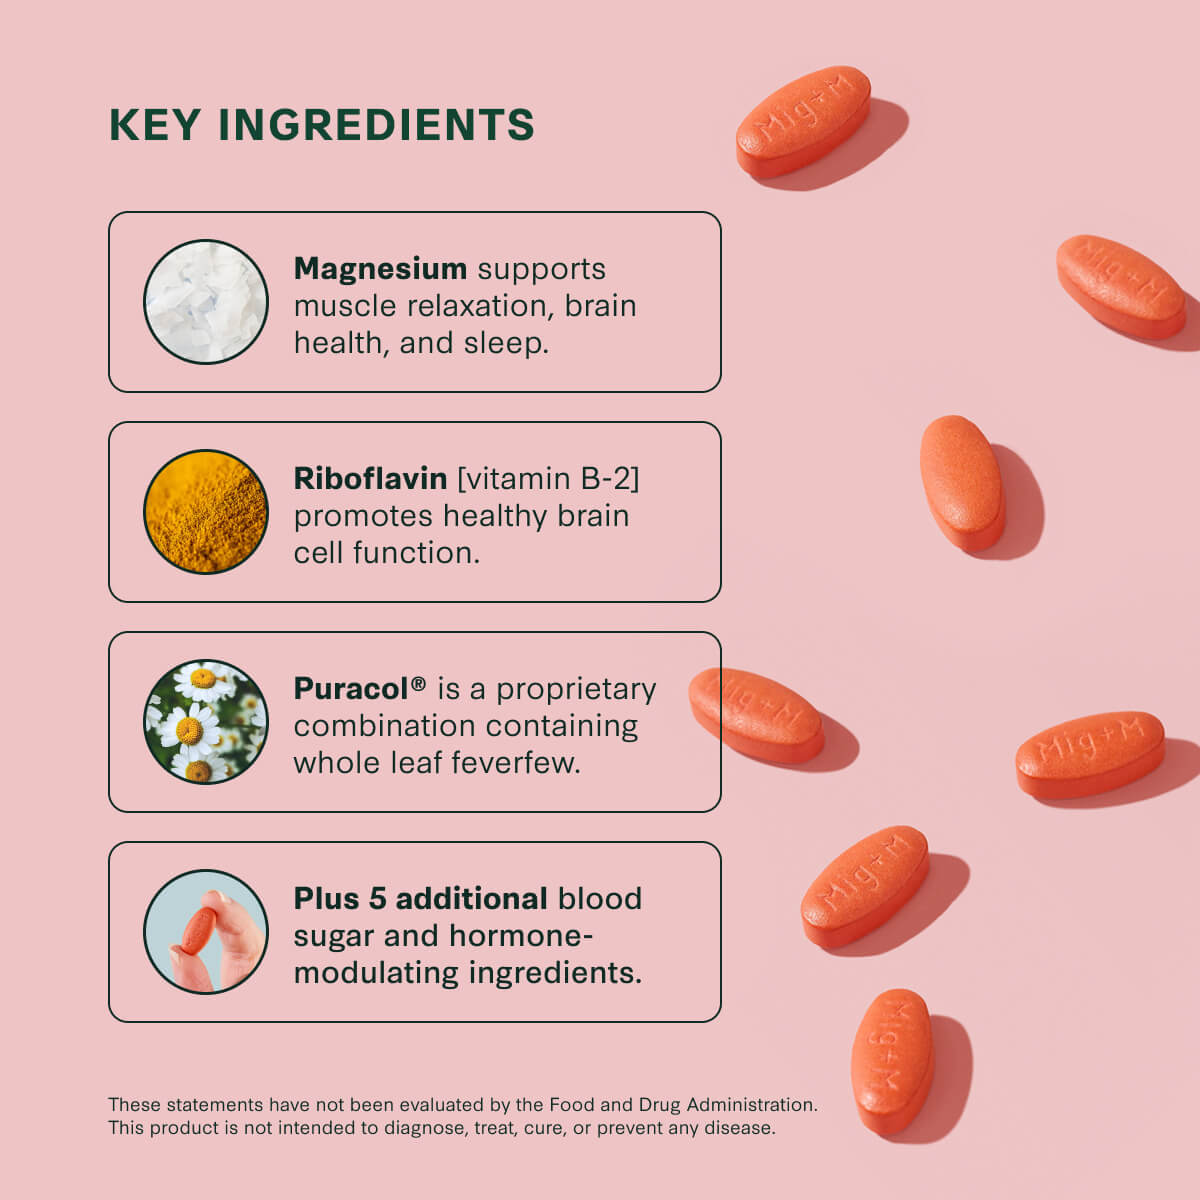 Key ingredients used in MigreLief+M supplement.